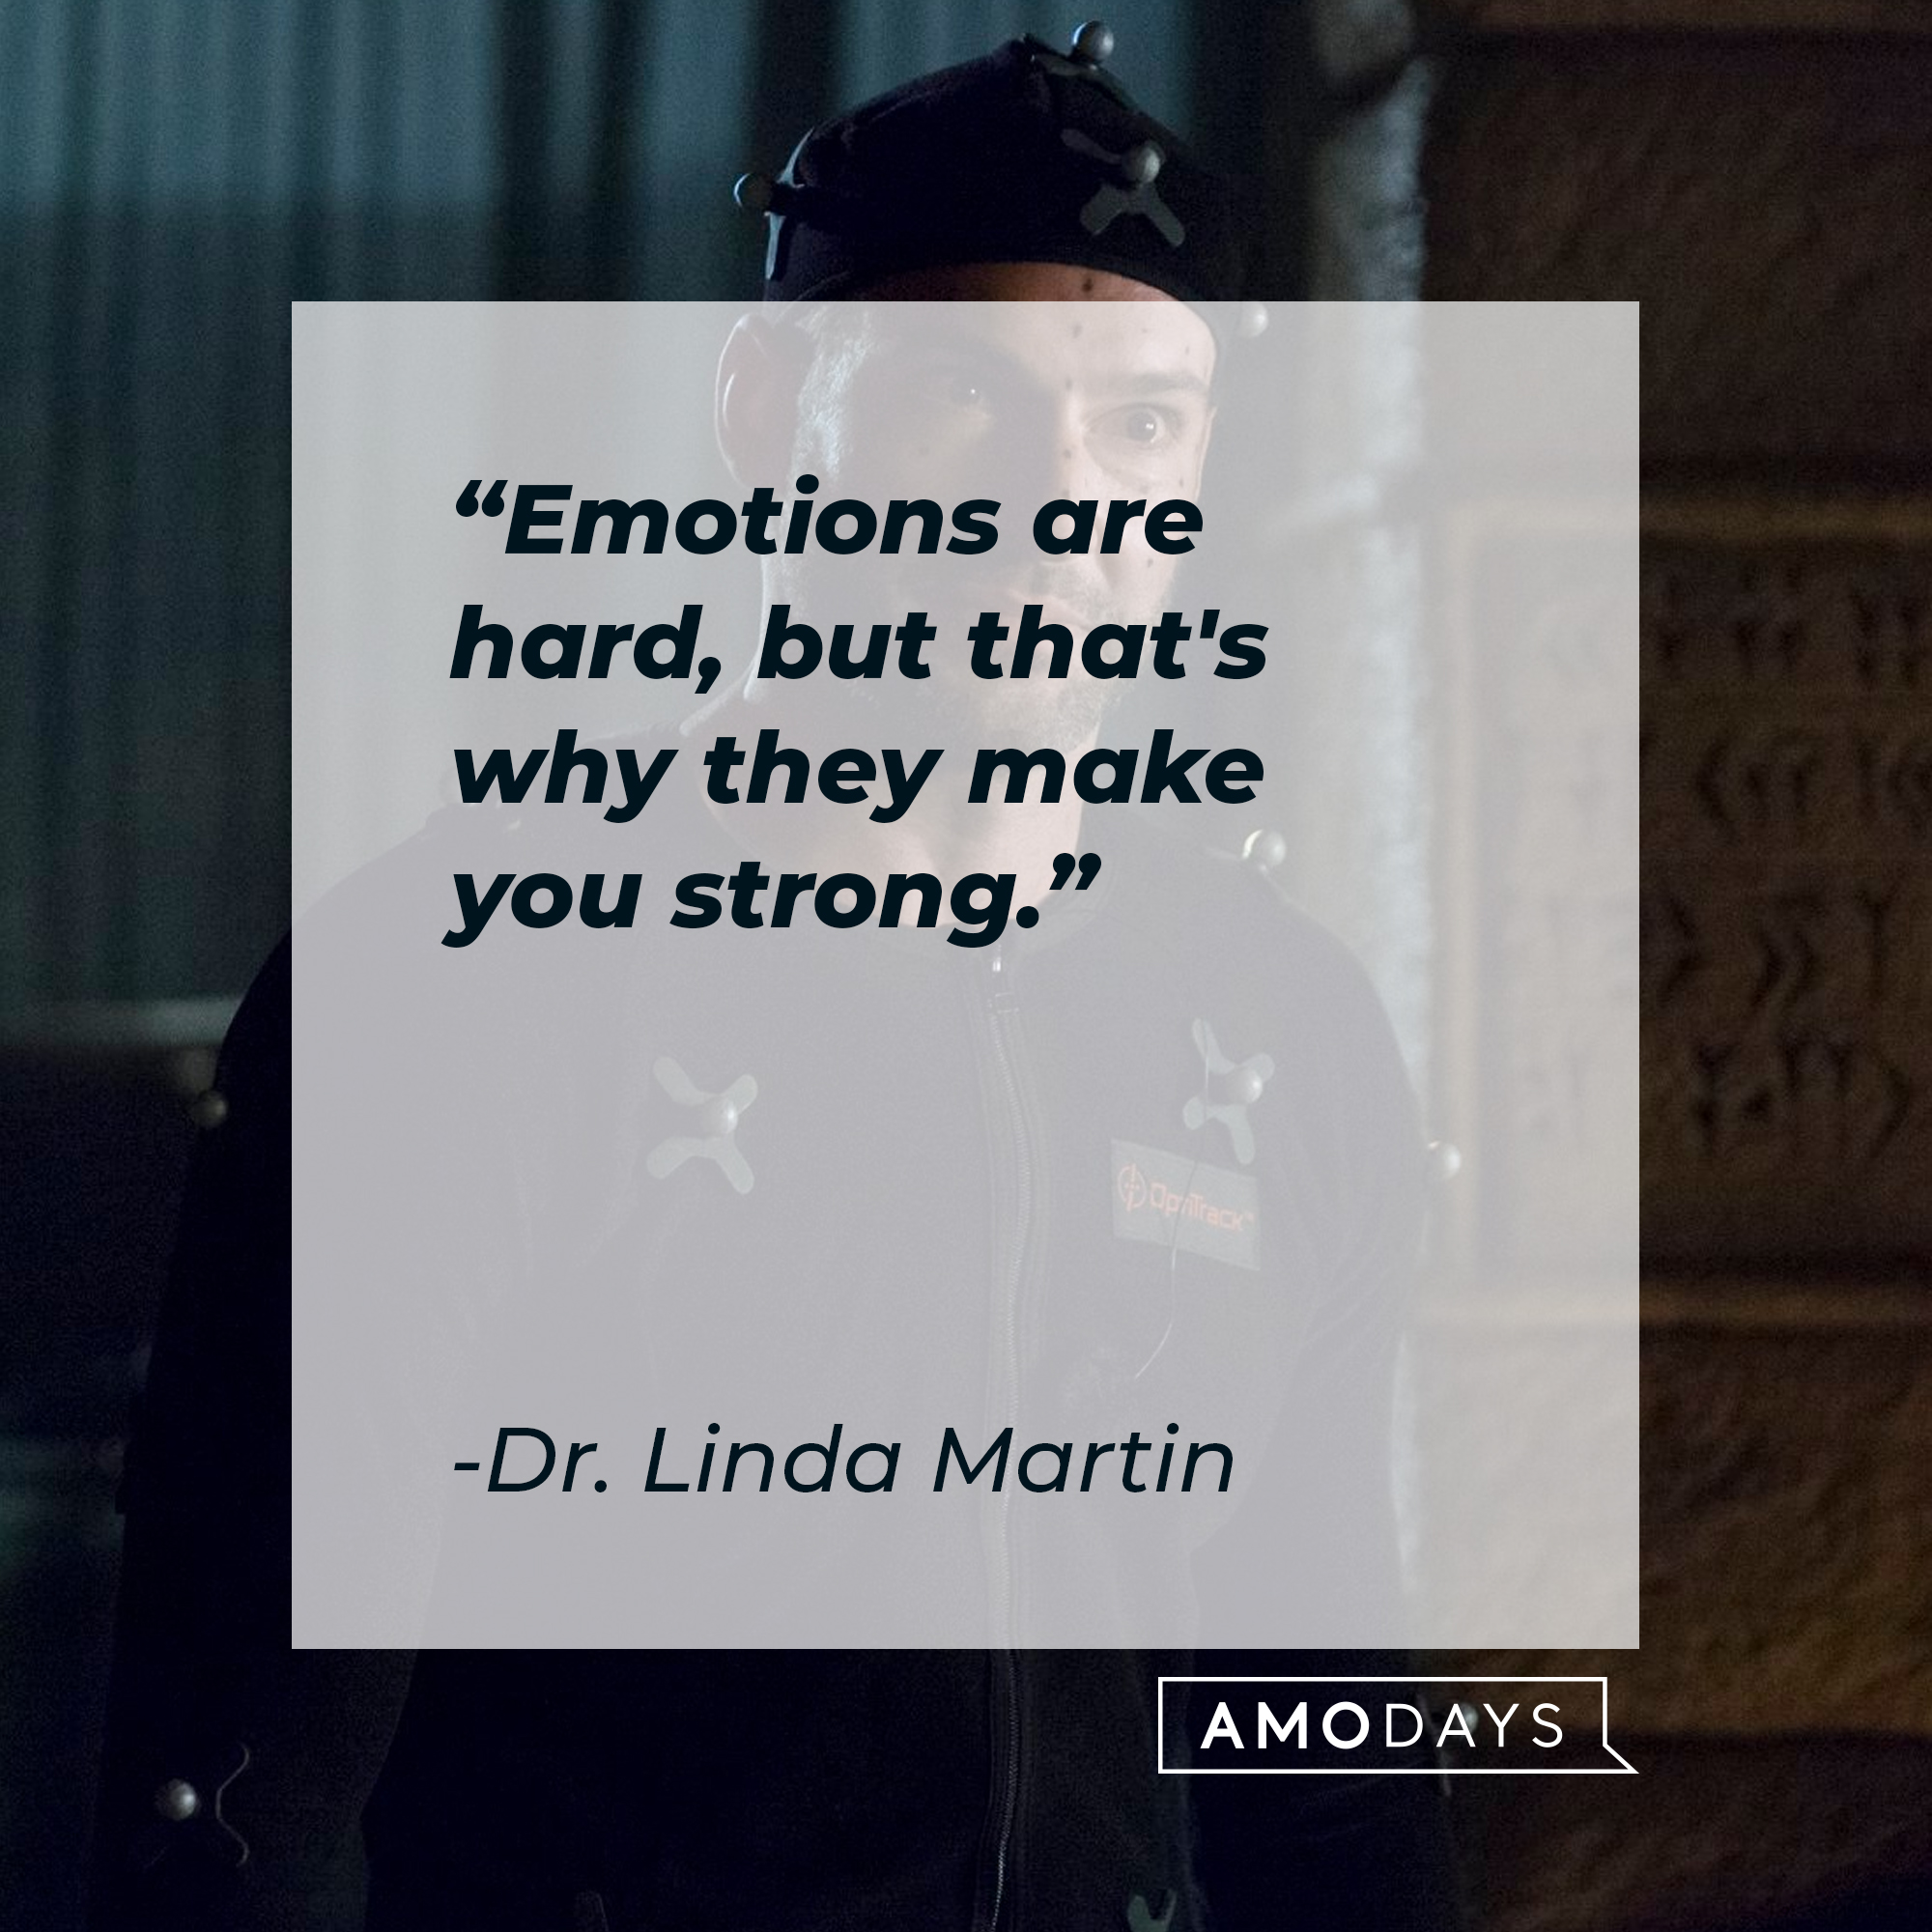 Dr. Linda Martin’s quote: "Emotions are hard, but that's why they make you strong."  | Source: Facebook.com/LuciferNetflix